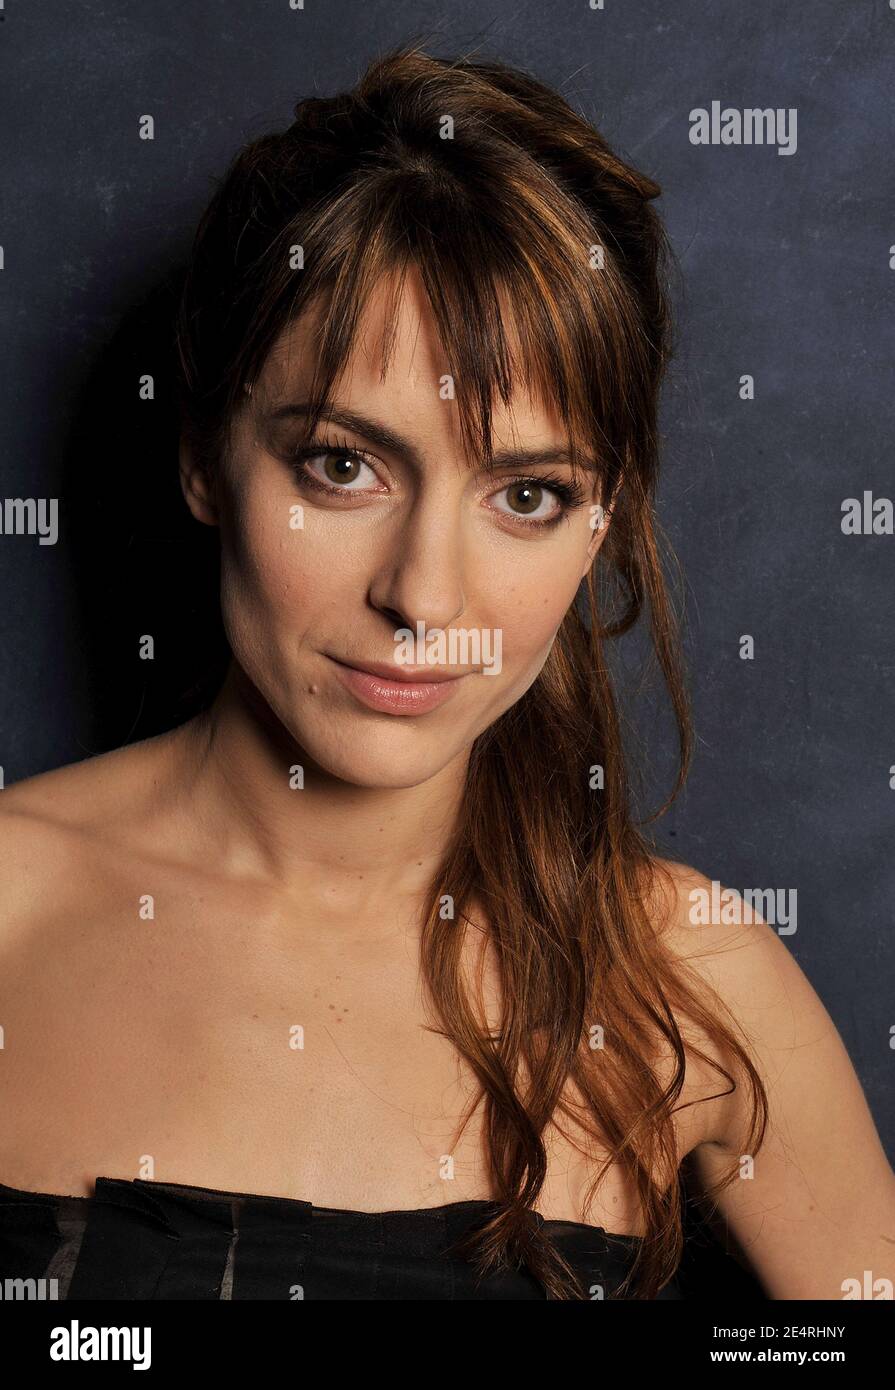 French actress Audrey Dana, winner of cinema prize 'Prix Romy Schneider 2008' poses at Royal Monceau Hotel in Paris, France on March 17, 2008 prior to the official award ceremony. Photo by Christophe Guibbaud/ABACAPRESS.COM Stock Photo